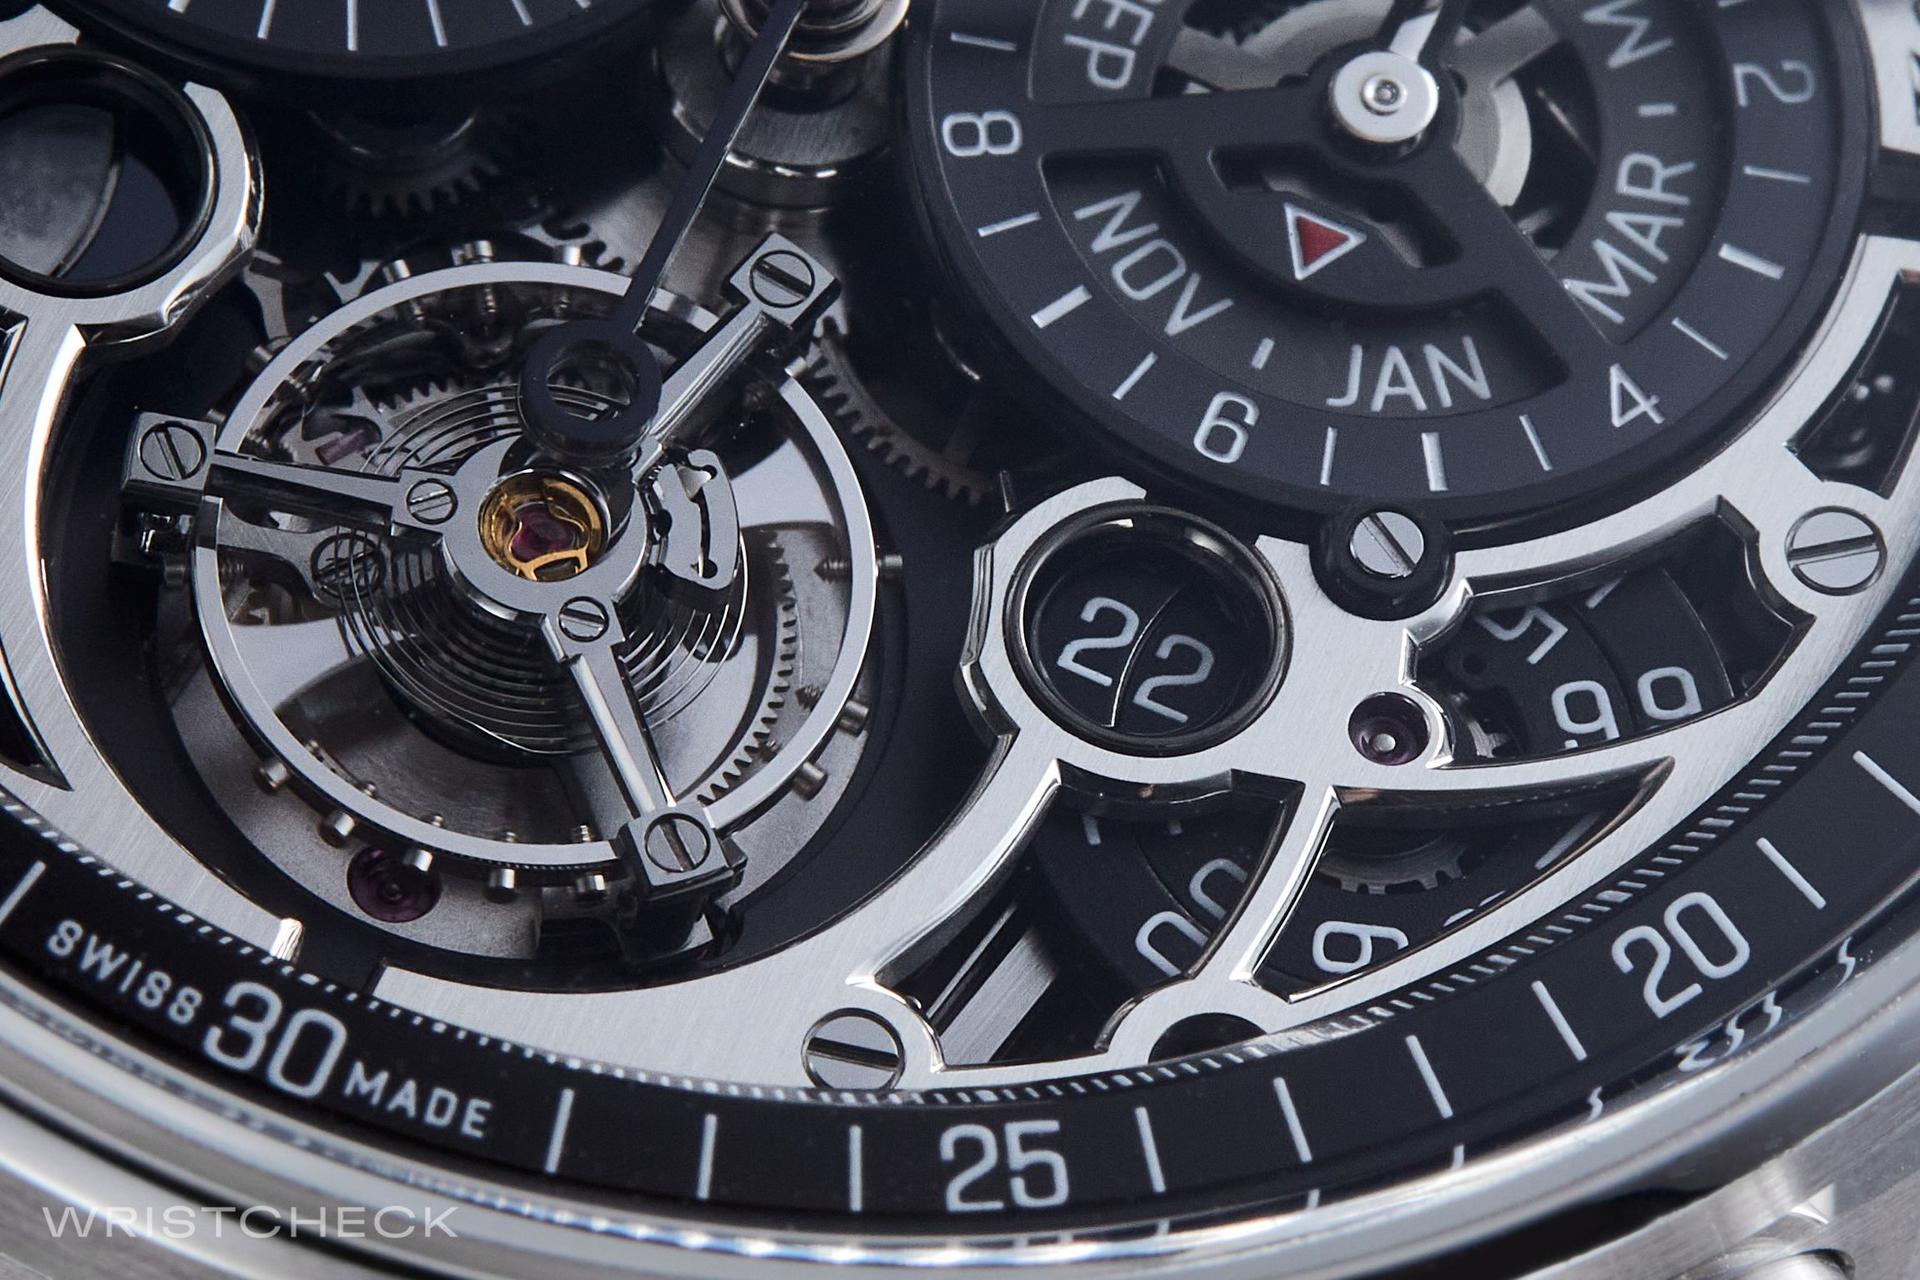 Activated via three crowns on the right side of the case, the flyback chrono and split-seconds mechanisms are a user’s delight